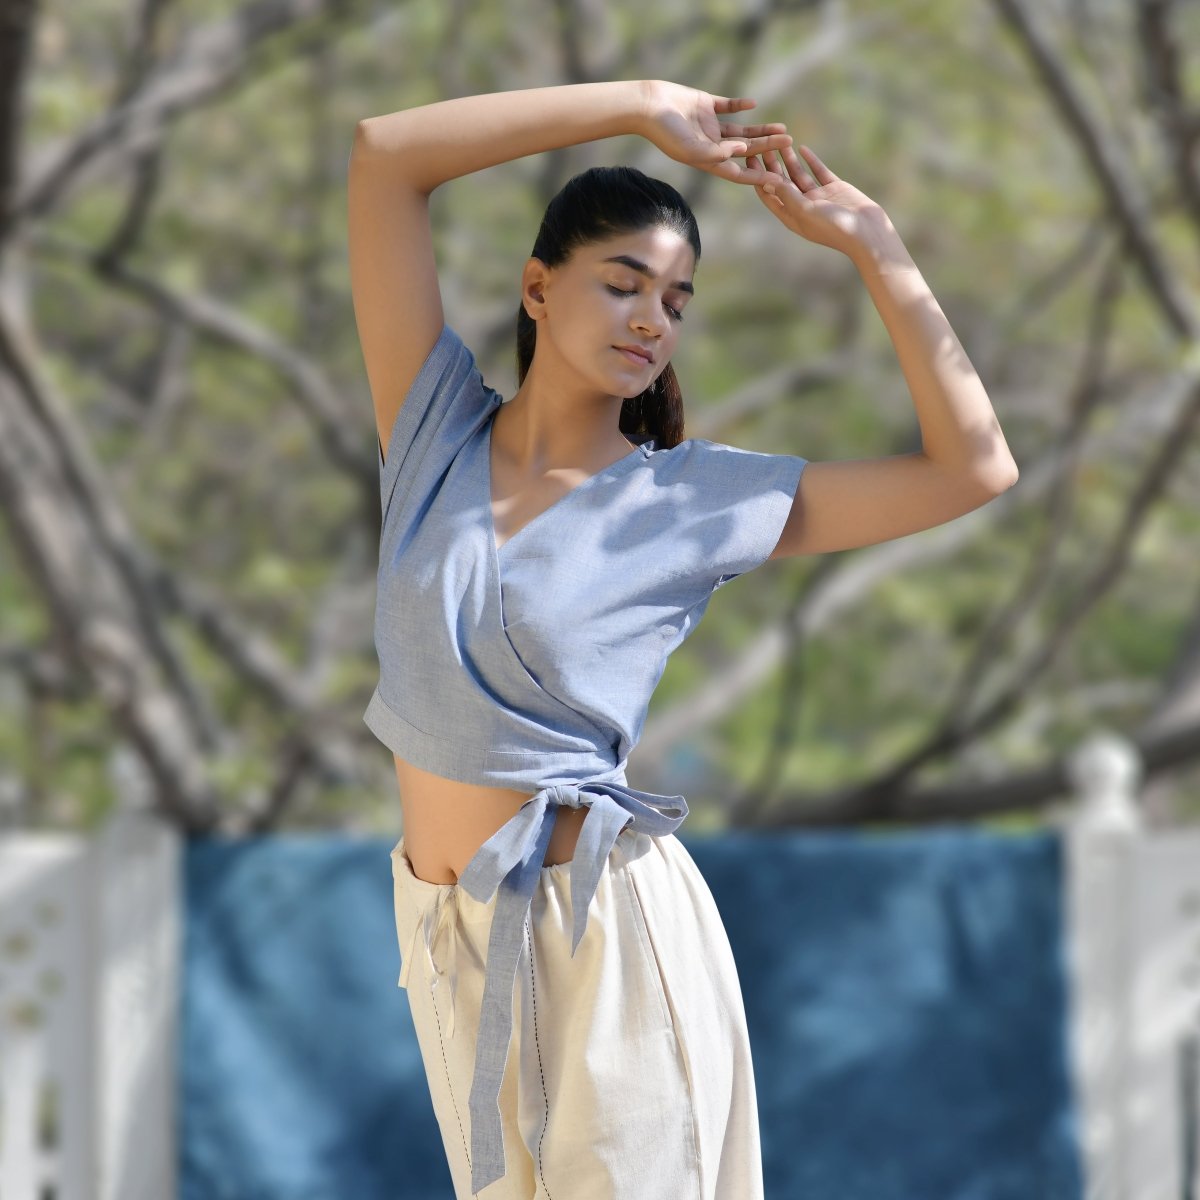 https://cdn.shopify.com/s/files/1/0549/4092/6195/products/azure-blue-cotton-crop-top-with-beige-yoga-harem-pant-combo-athleisure-wear-combo-for-womenwomens-wearpt-bl-2047-hs-925215.jpg?v=1696433104